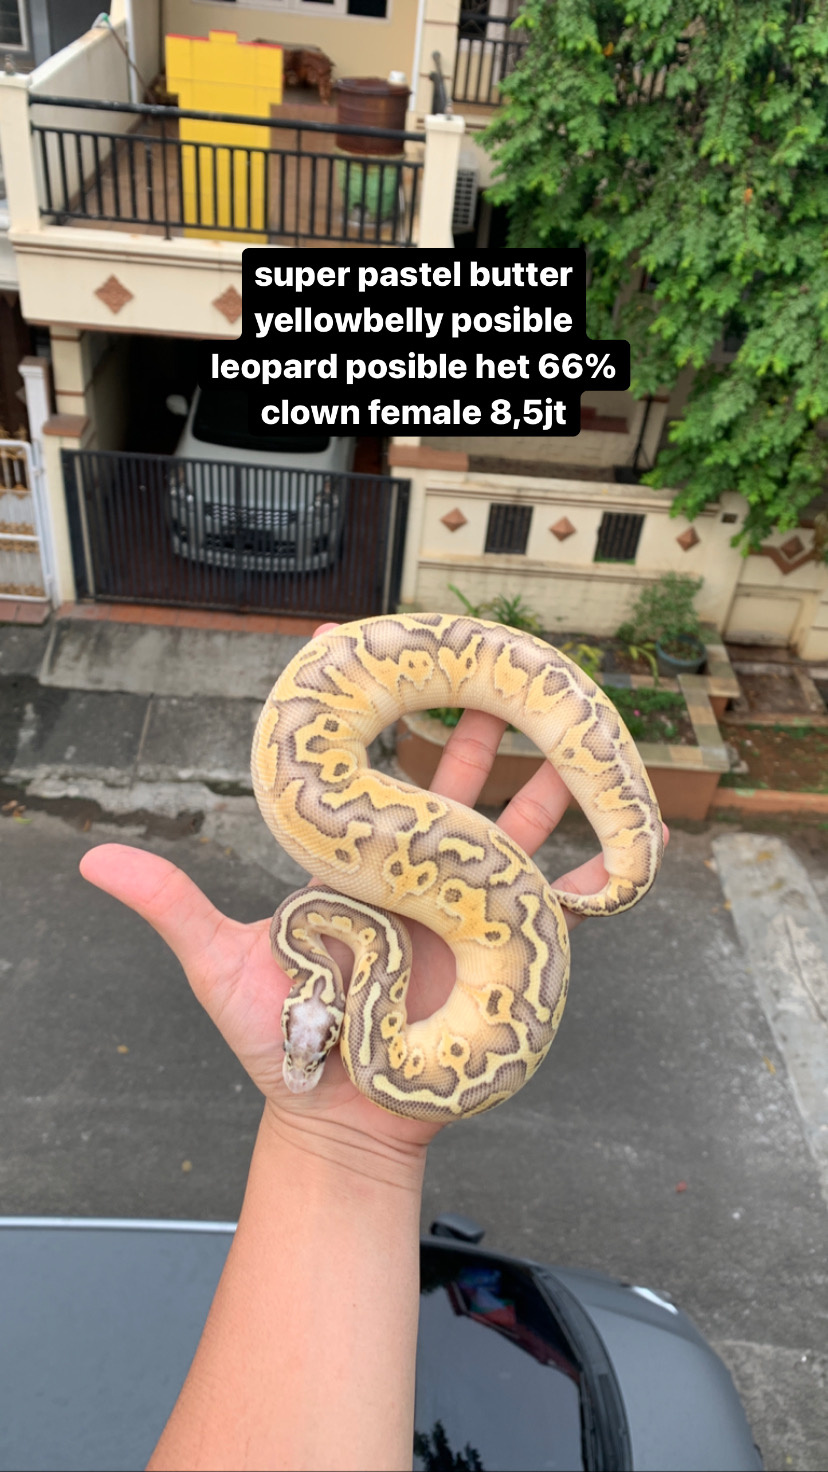 ball python female super pastel butter yellowbelly posible leopard ph clown 66%